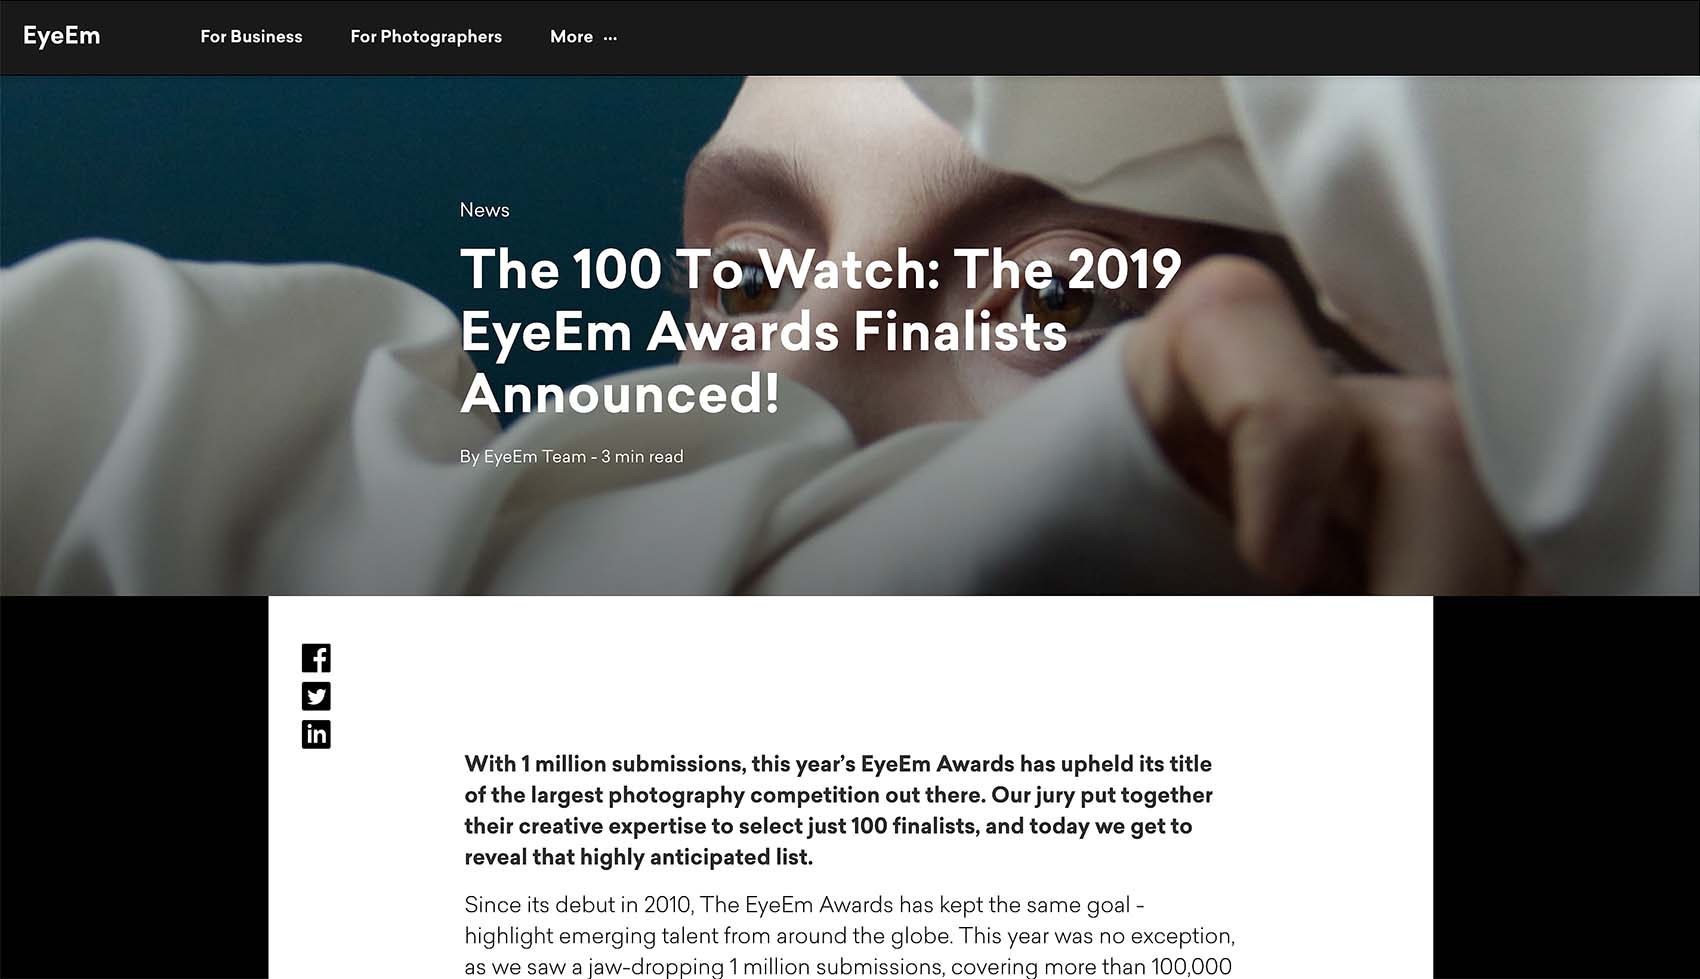 The 100 to watch: The 2019 EyeEm Awards Finalists Announced!